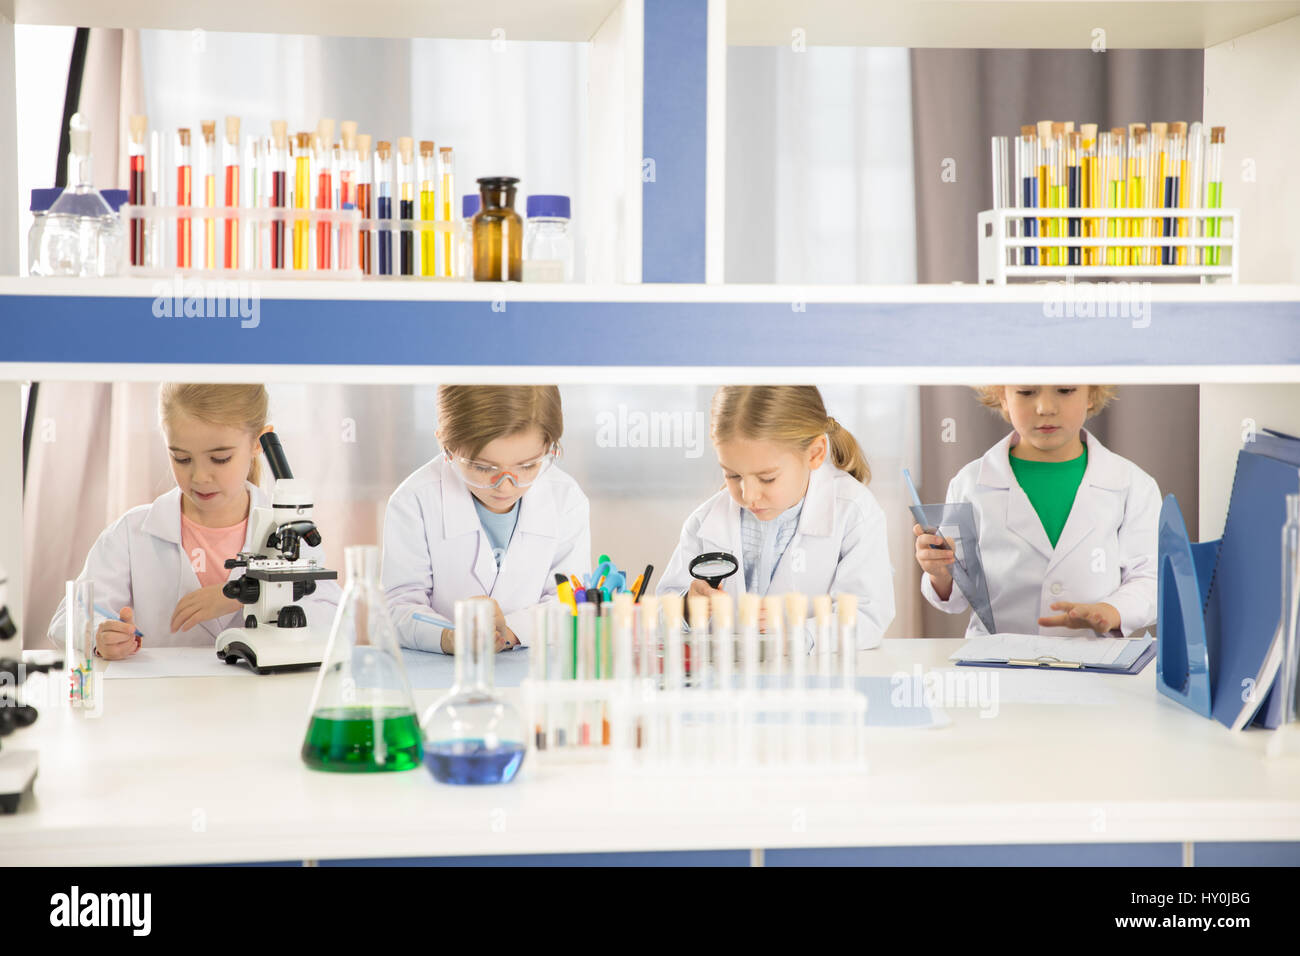 Schoolchildren in lab coats studying together in chemical laboratory Stock Photo